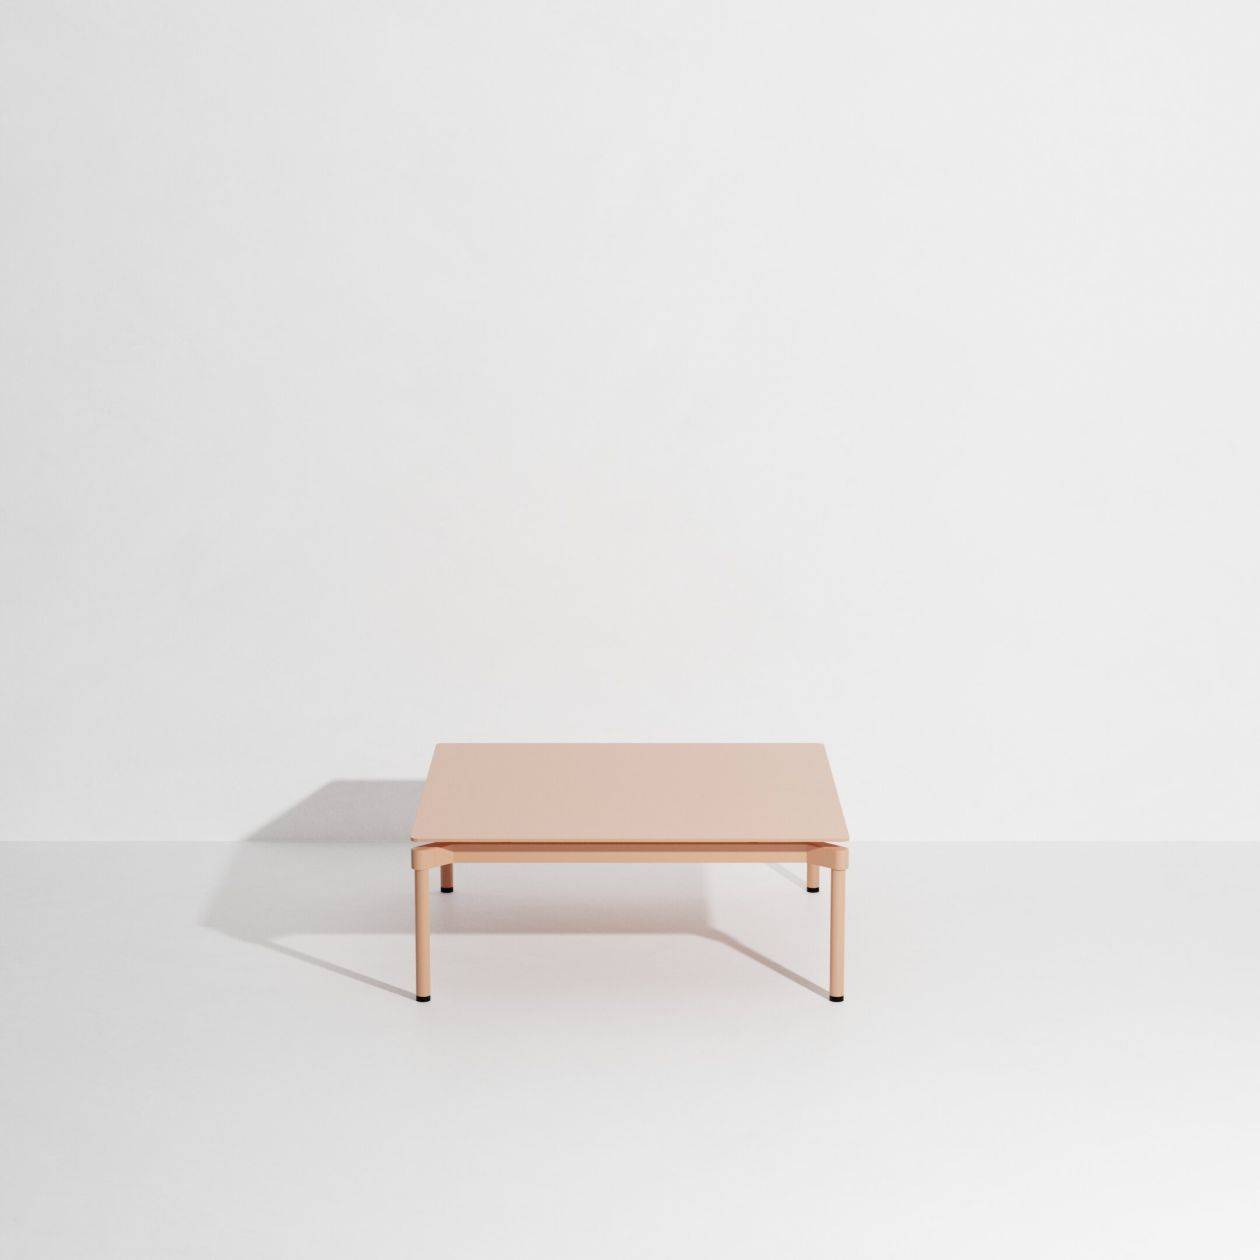 Fromme Coffee Table - Blush